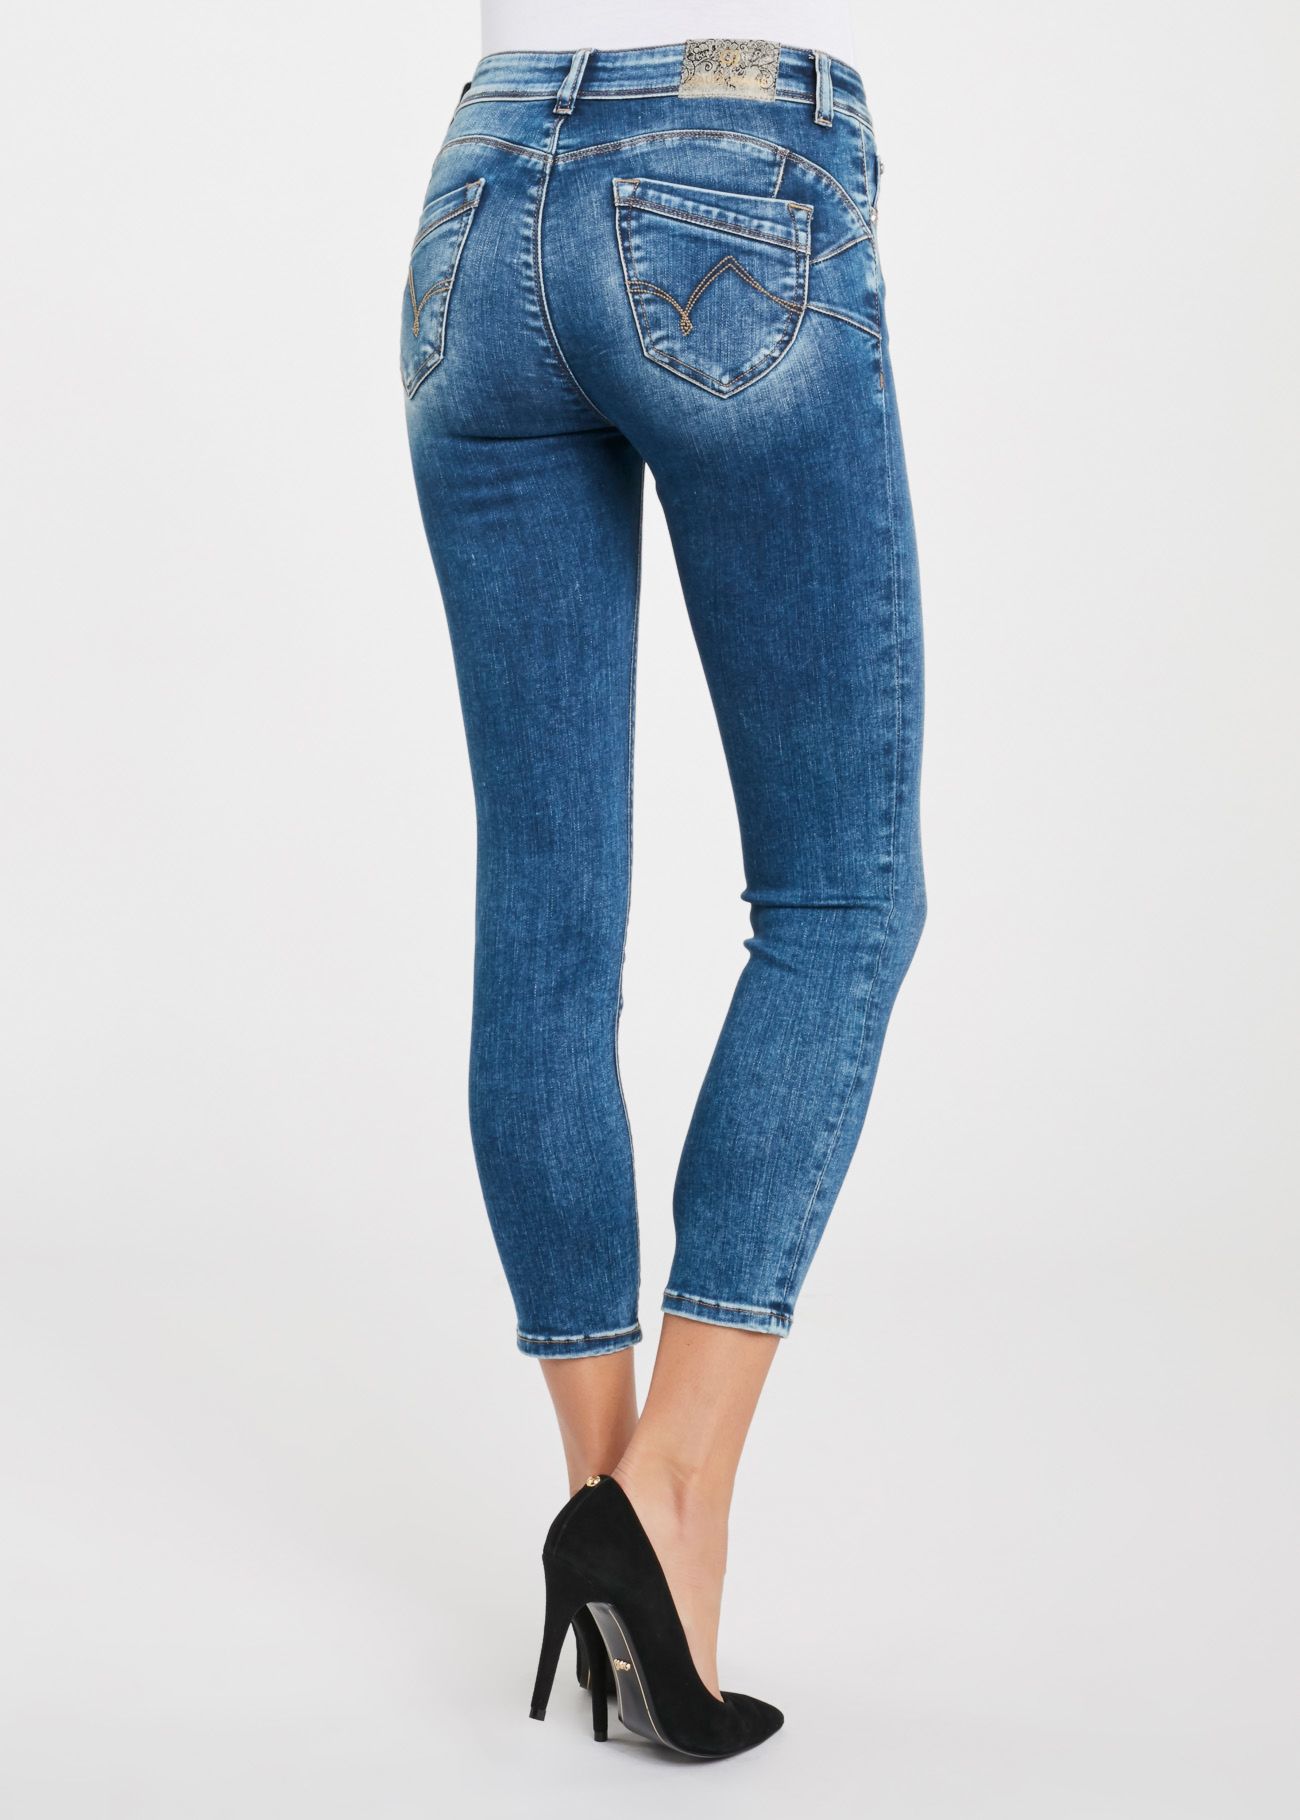 Used-effect jeans